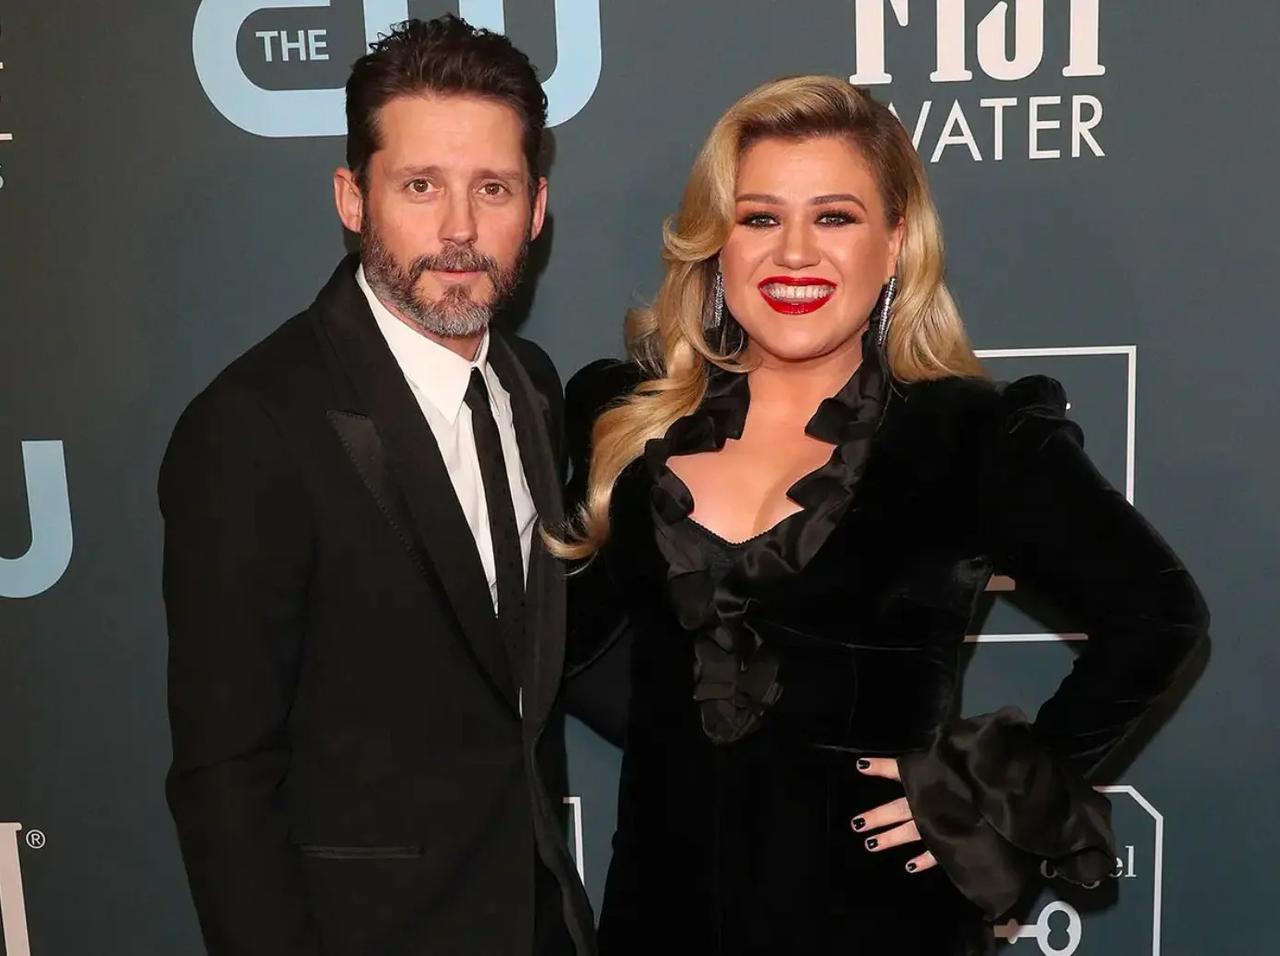 Is Kelly Clarkson Ready To Date After Brandon Blackstock Divorce?